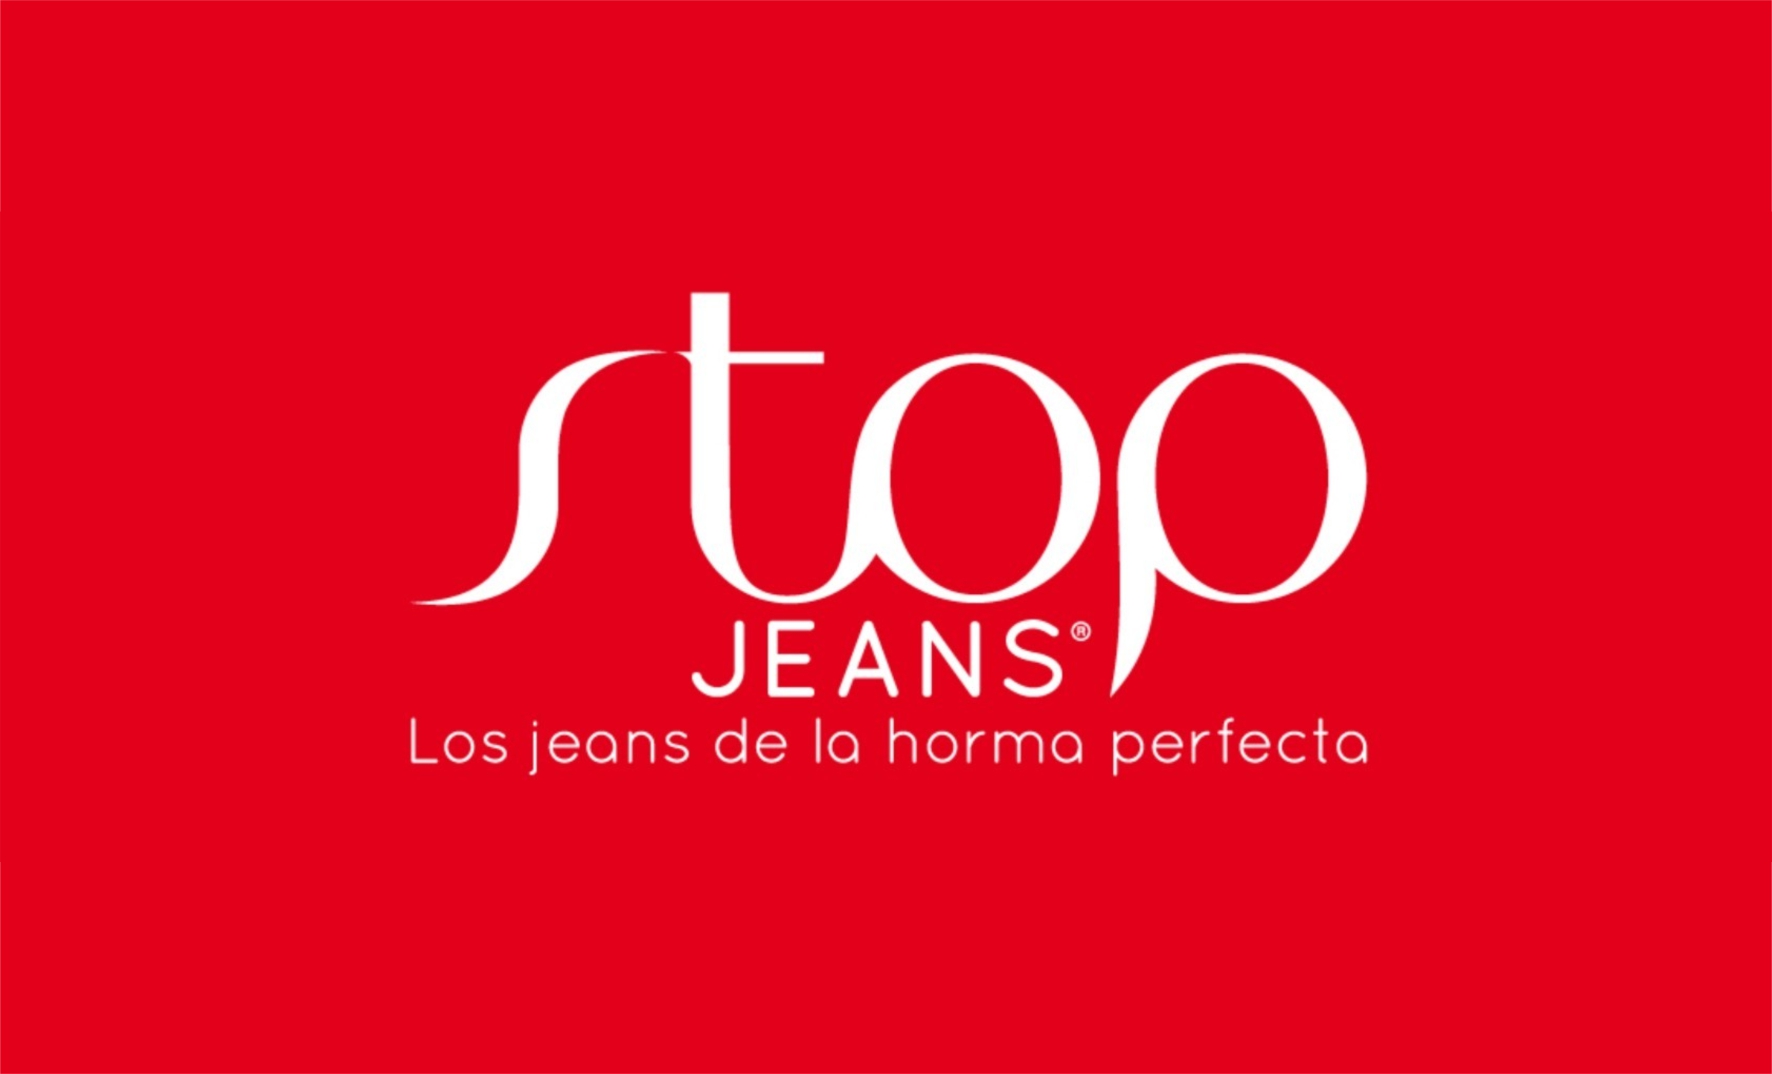 Stop Jeans